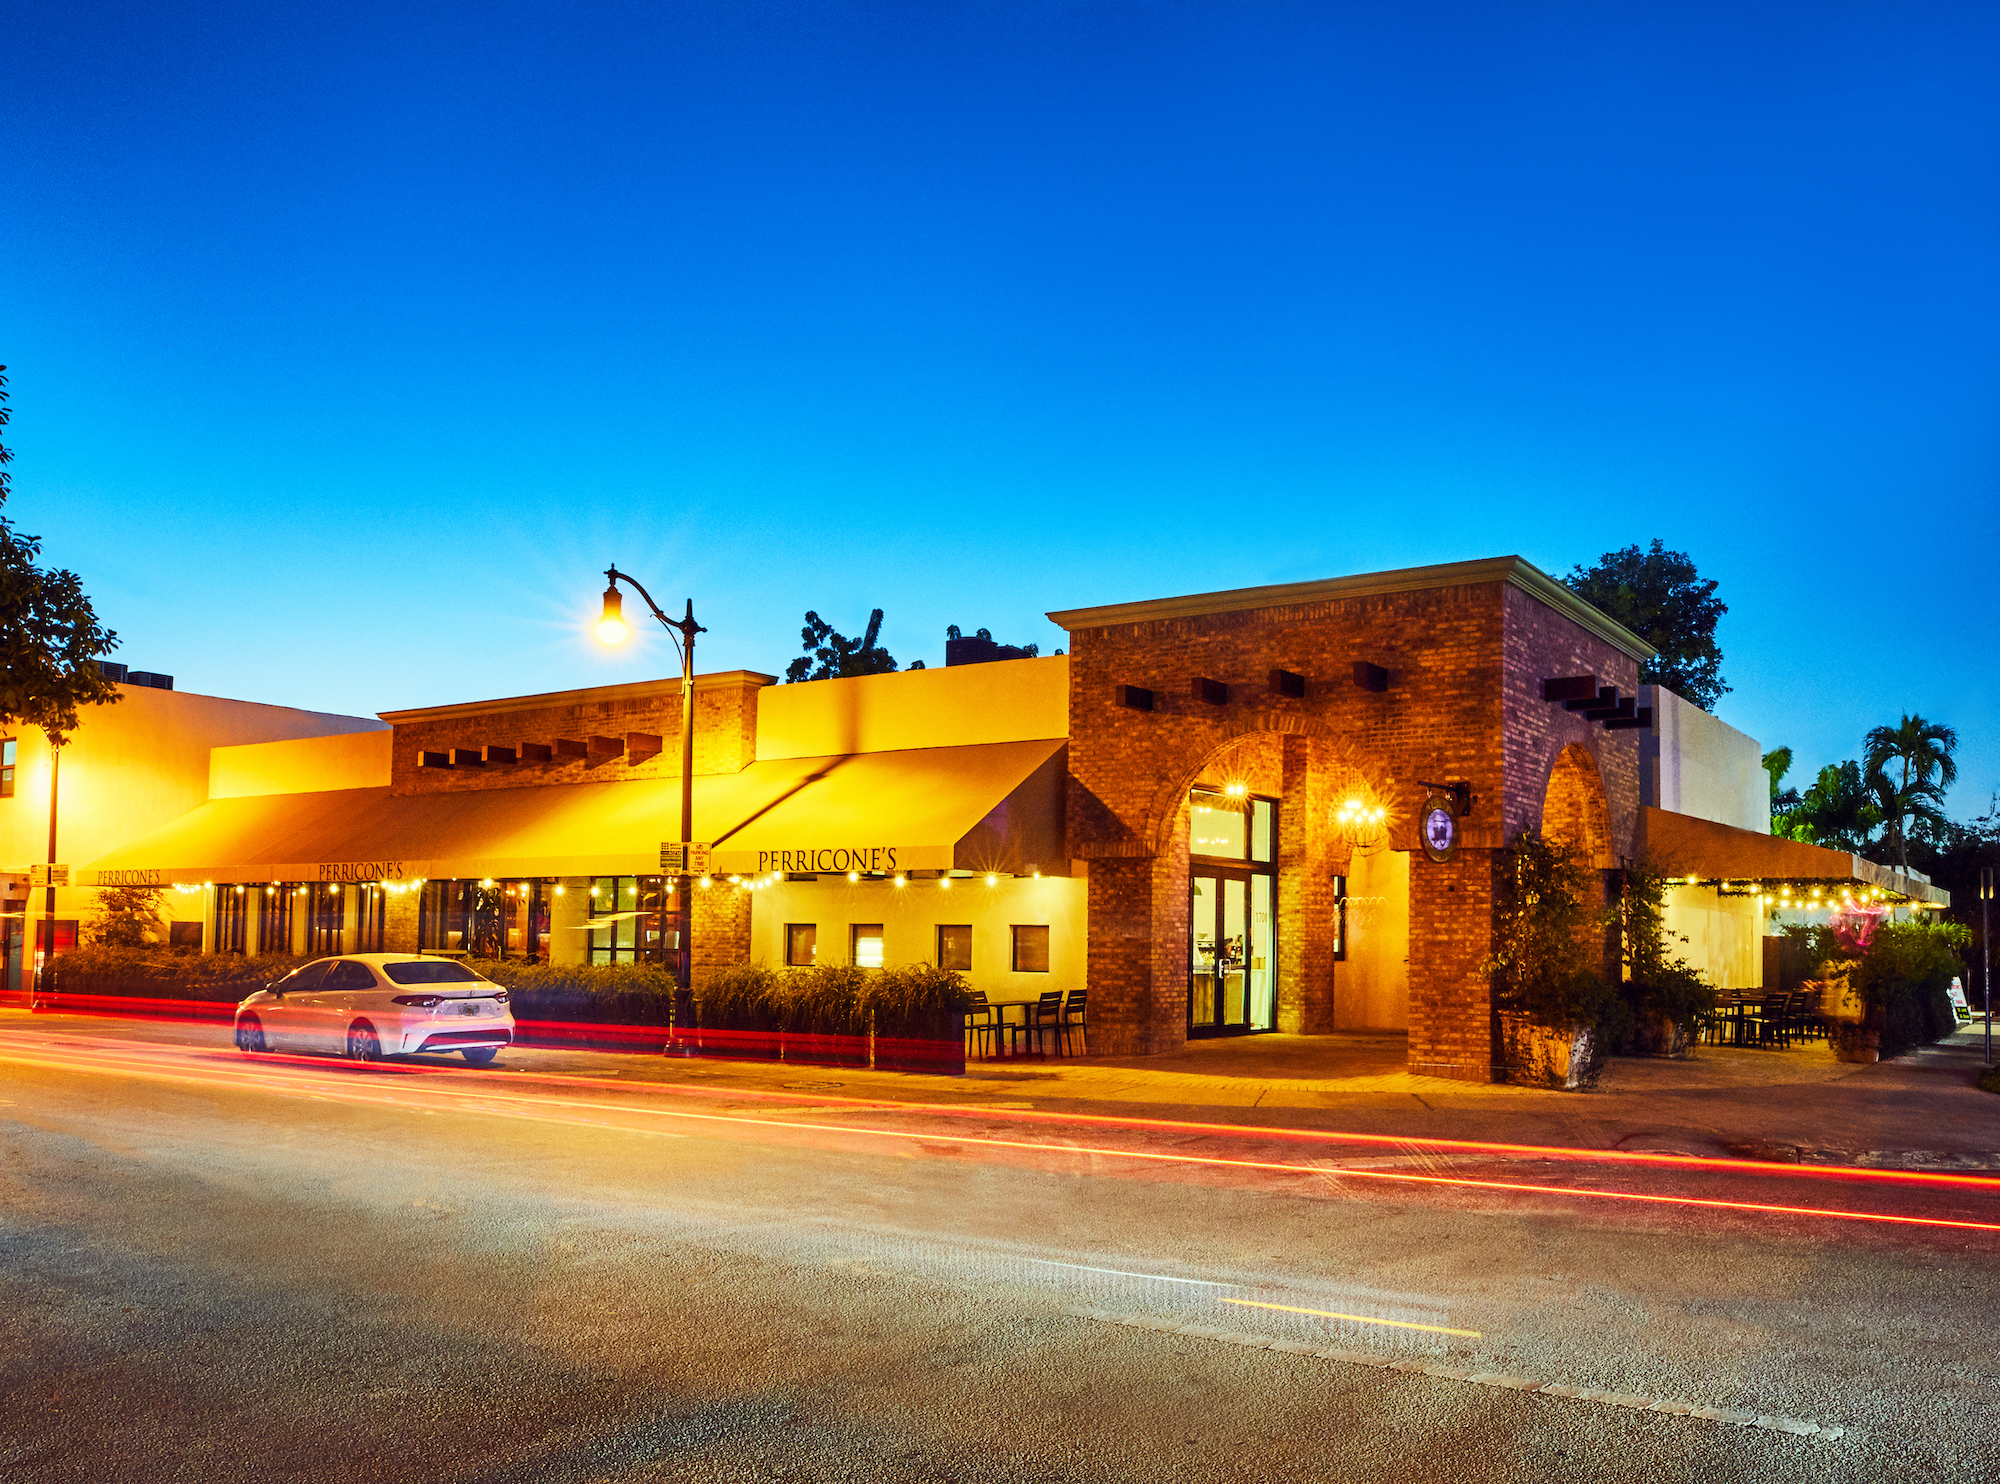 Exterior of Perricone's at dusk. car and tail light trails visible in foreground